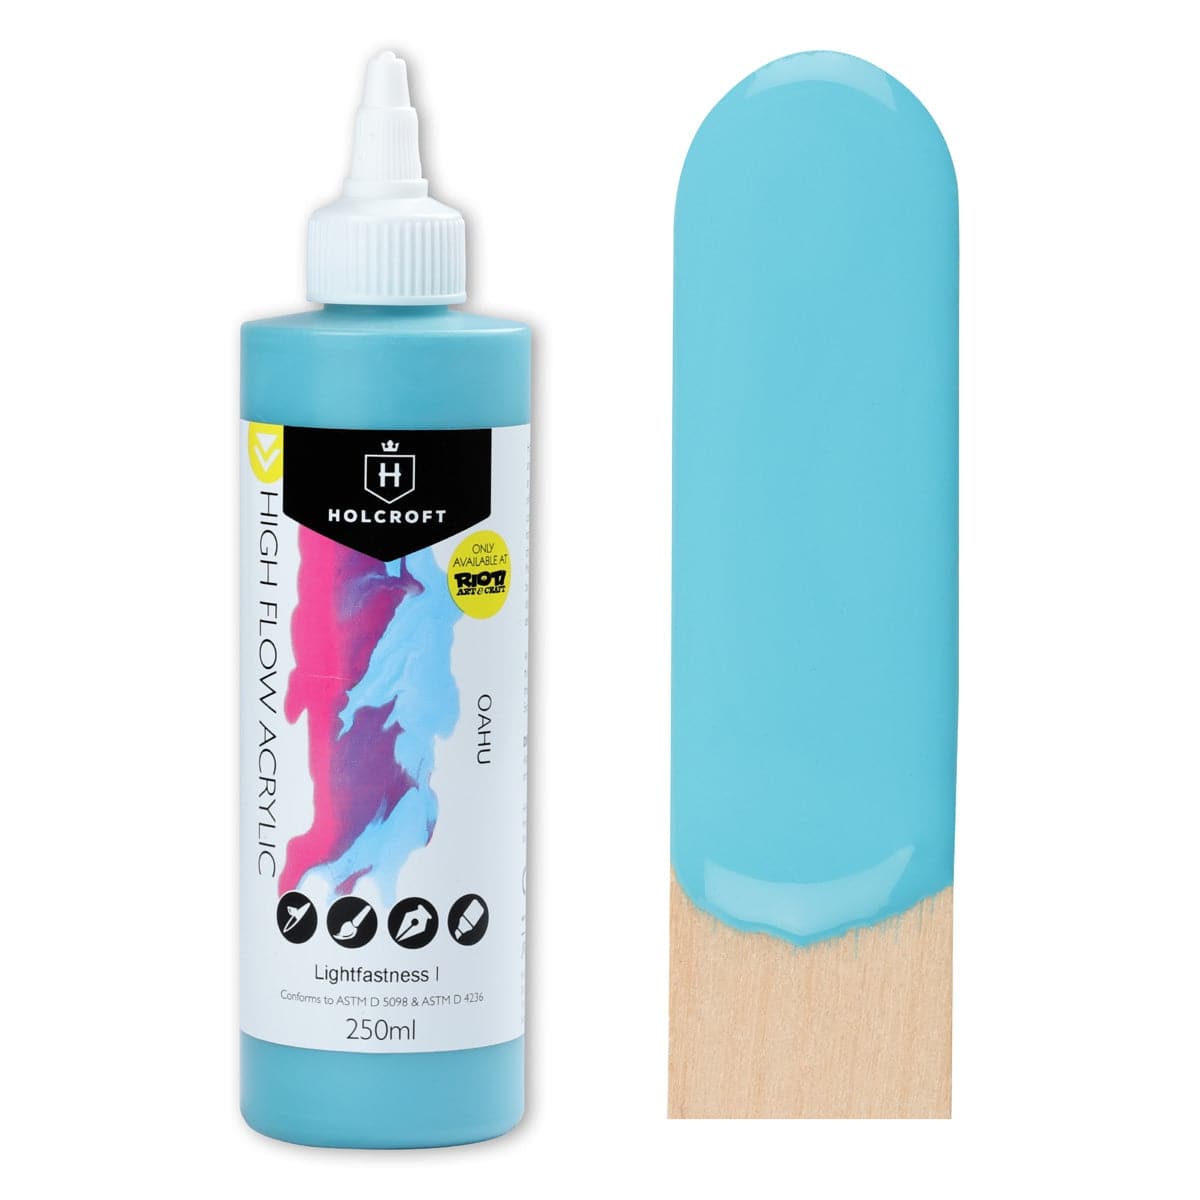 Shop with Confidence : Holcroft High Flow Acrylic Paint Oahu 250ml 904